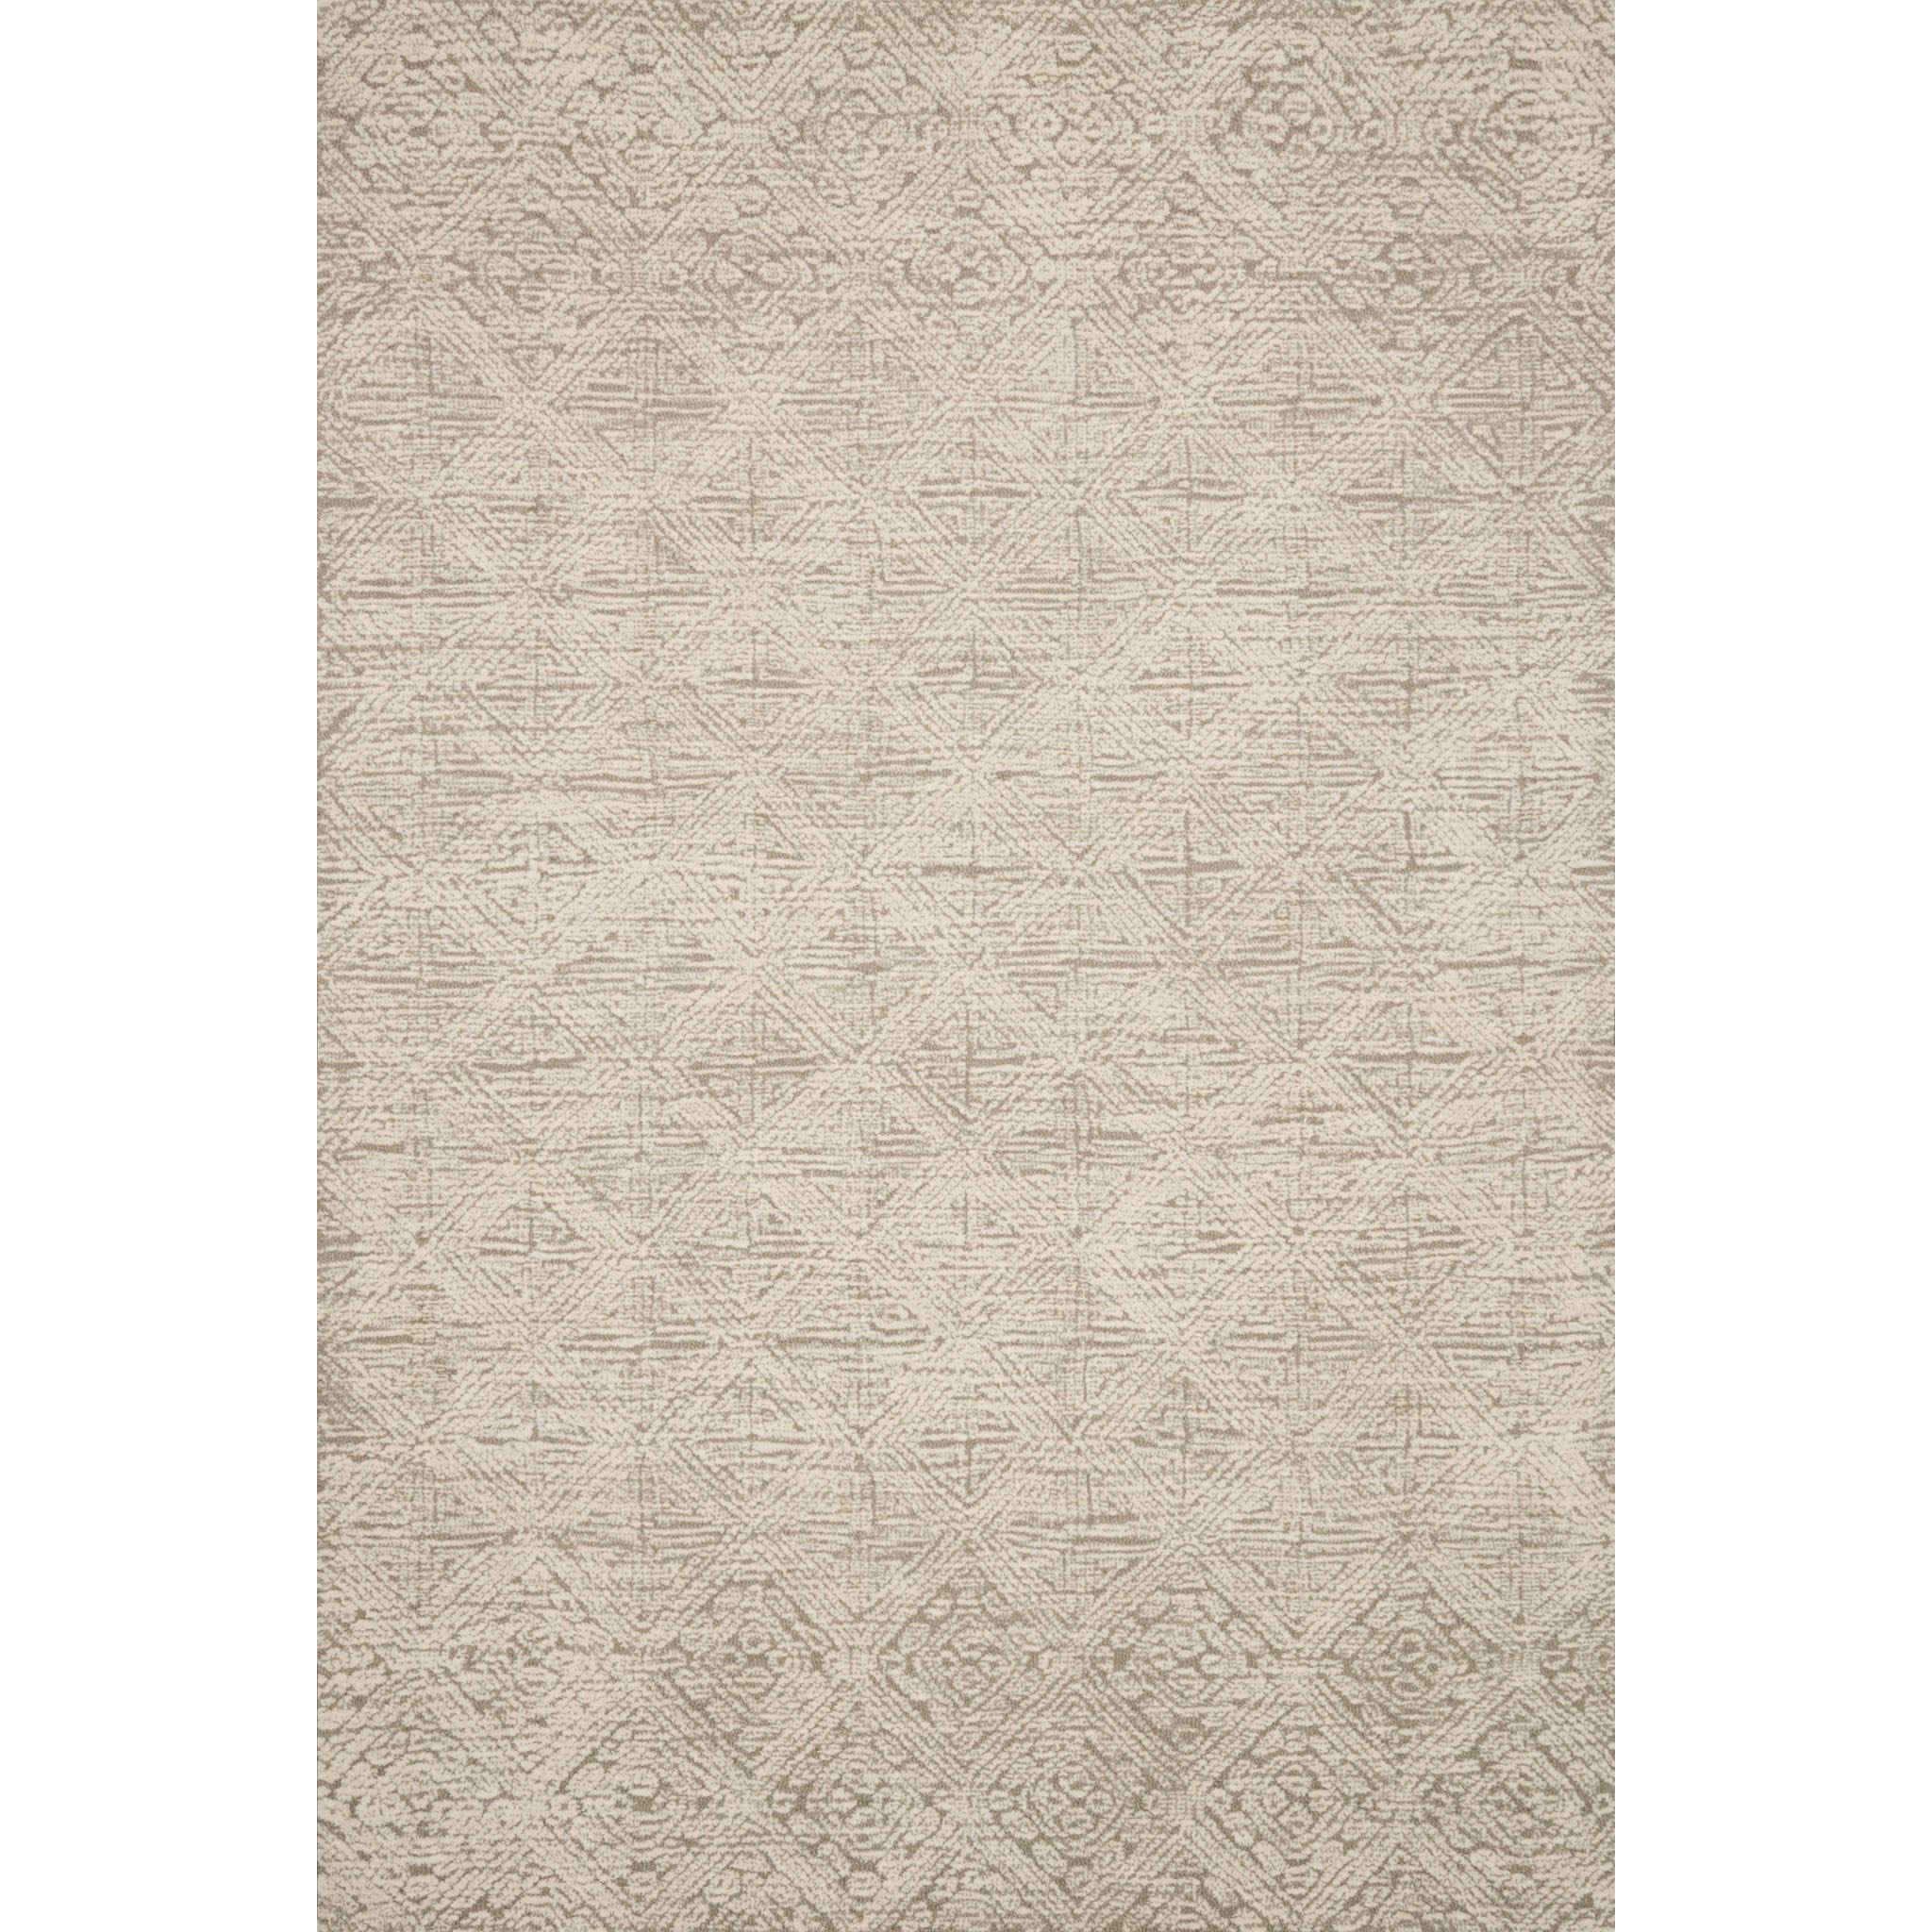 Kopa Taupe/Ivory Rug - Amethyst Home With stunning and delicate linear patterns, the Kopa Collection provides an energetic and fresh canvas for a low profile, long-lasting 100% wool rug. Each design is hand-tufted by skilled artisans in India. Crafted by Loloi for ED Ellen DeGeneres.